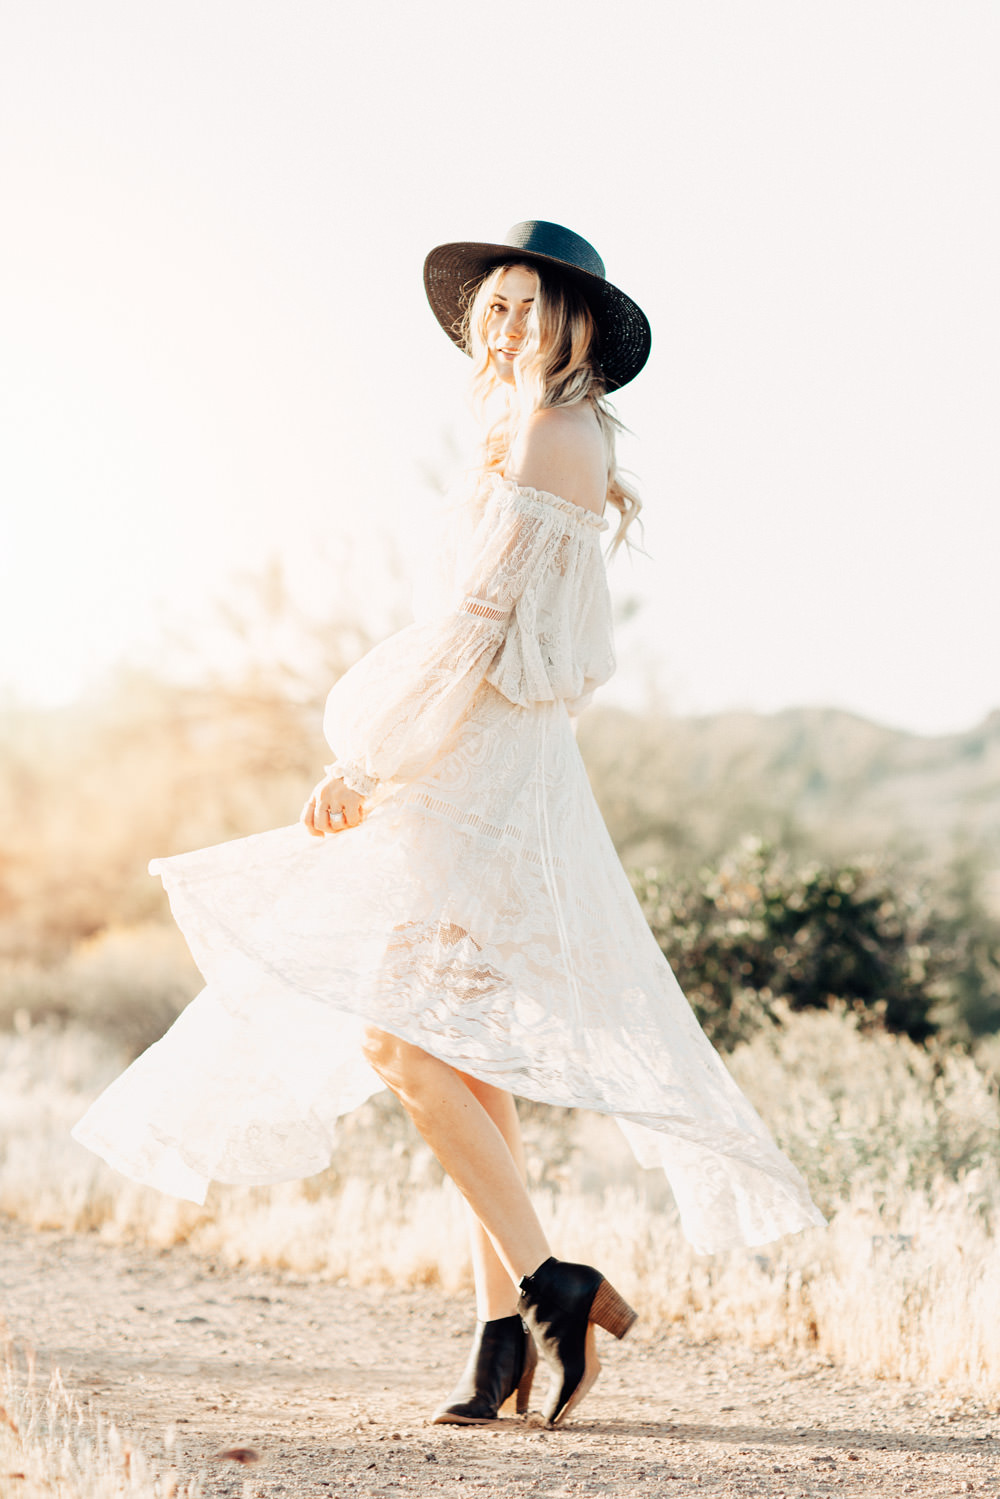 Caitlin Lindquist of the Arizona fashion blog Dash of Darling wears a Spell Designs white lace off shoulder top and skirt in the desert